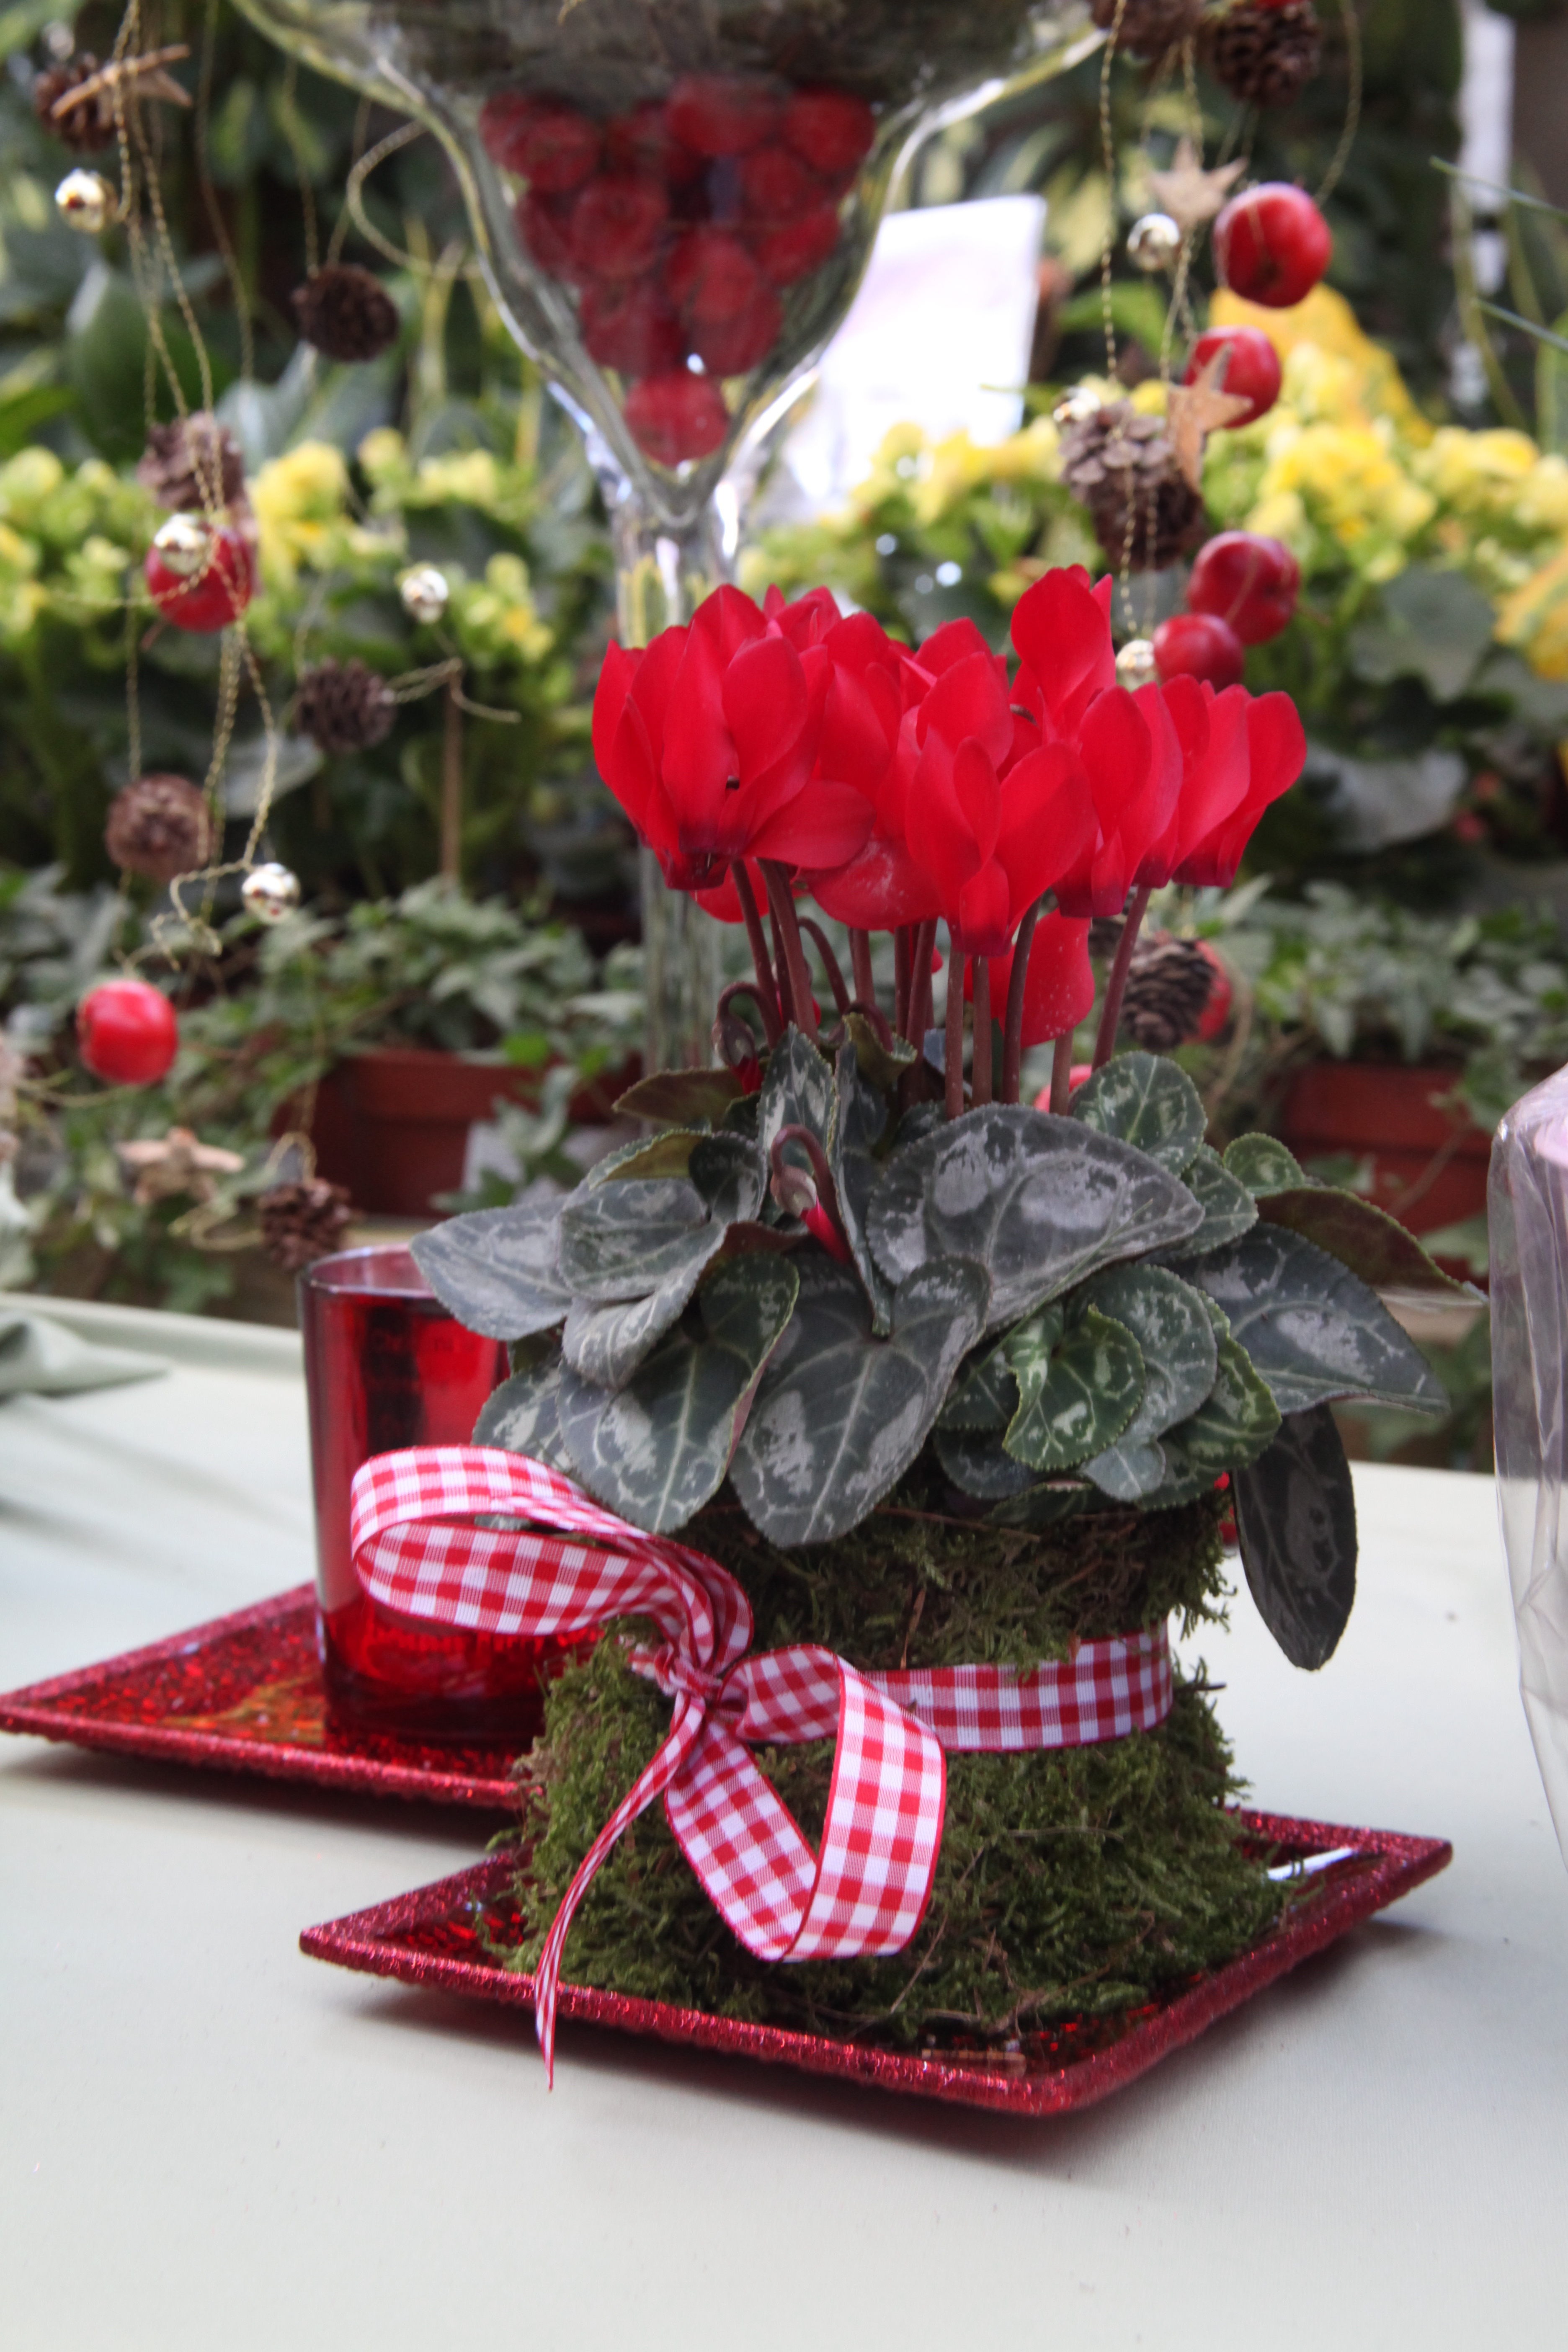 A bright red winter cyclamen with rustic greenery and ribbon